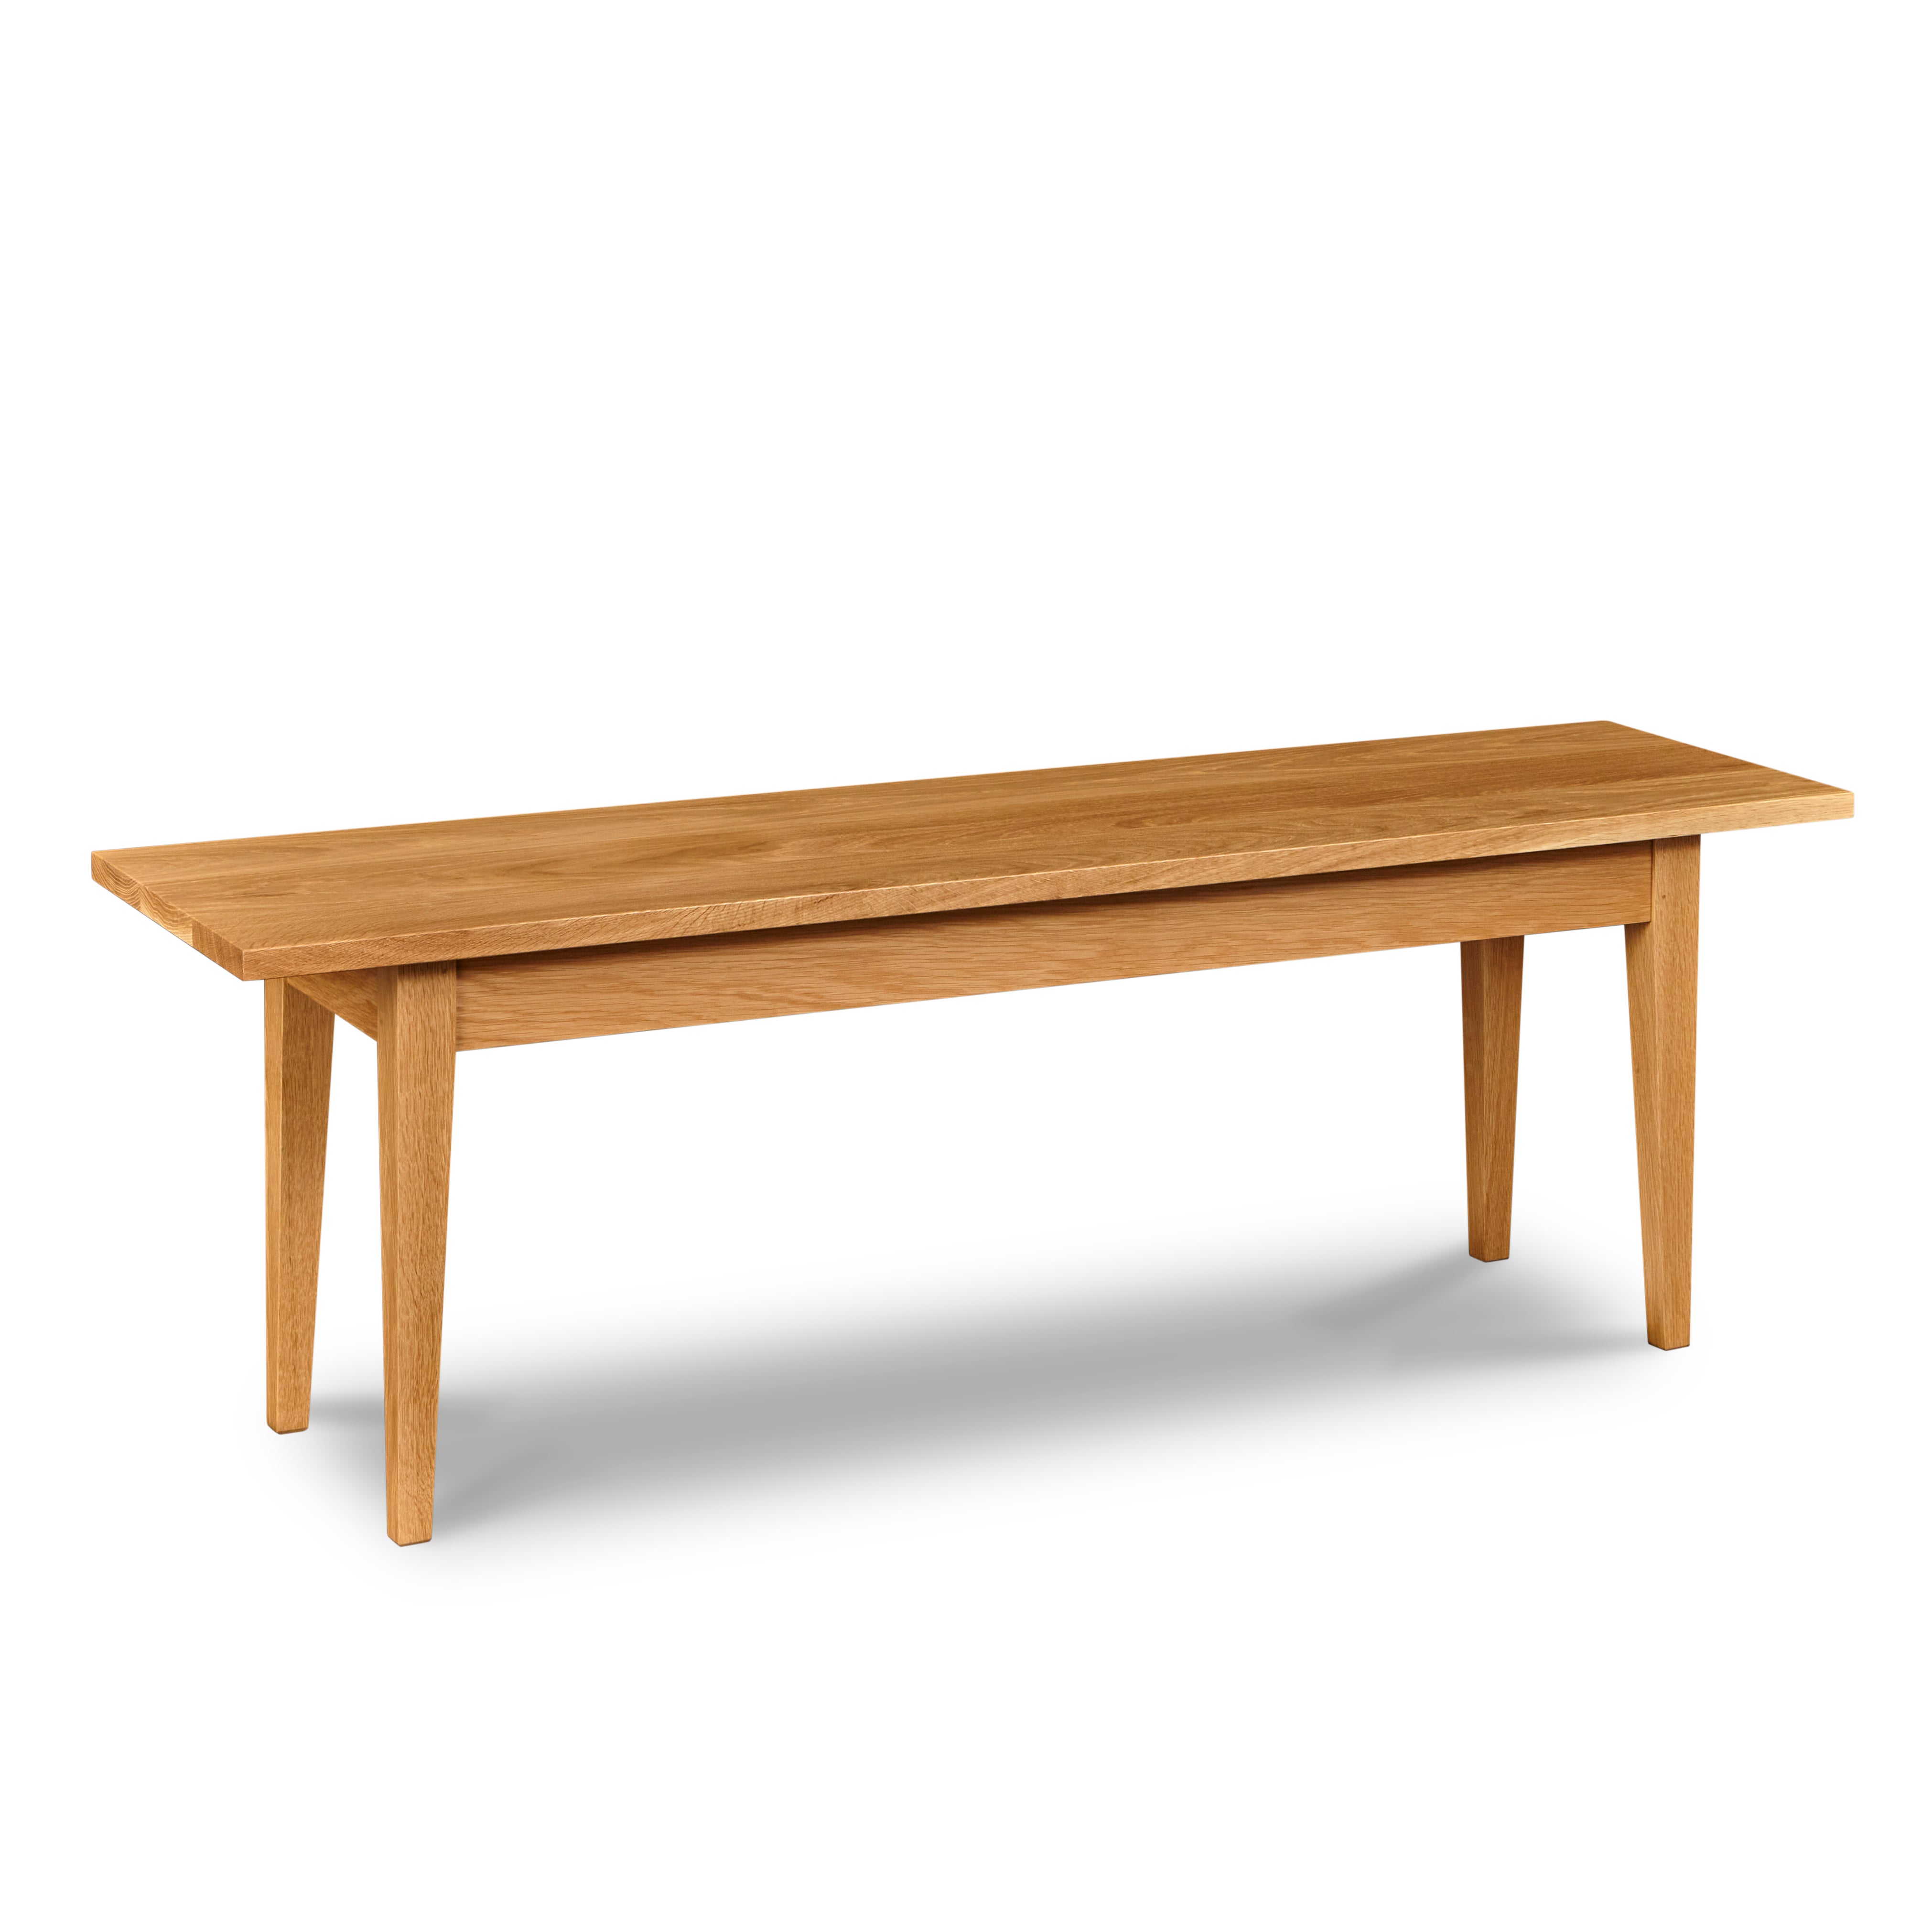 Traditional Shaker style bench with large overhangs in white oak wood